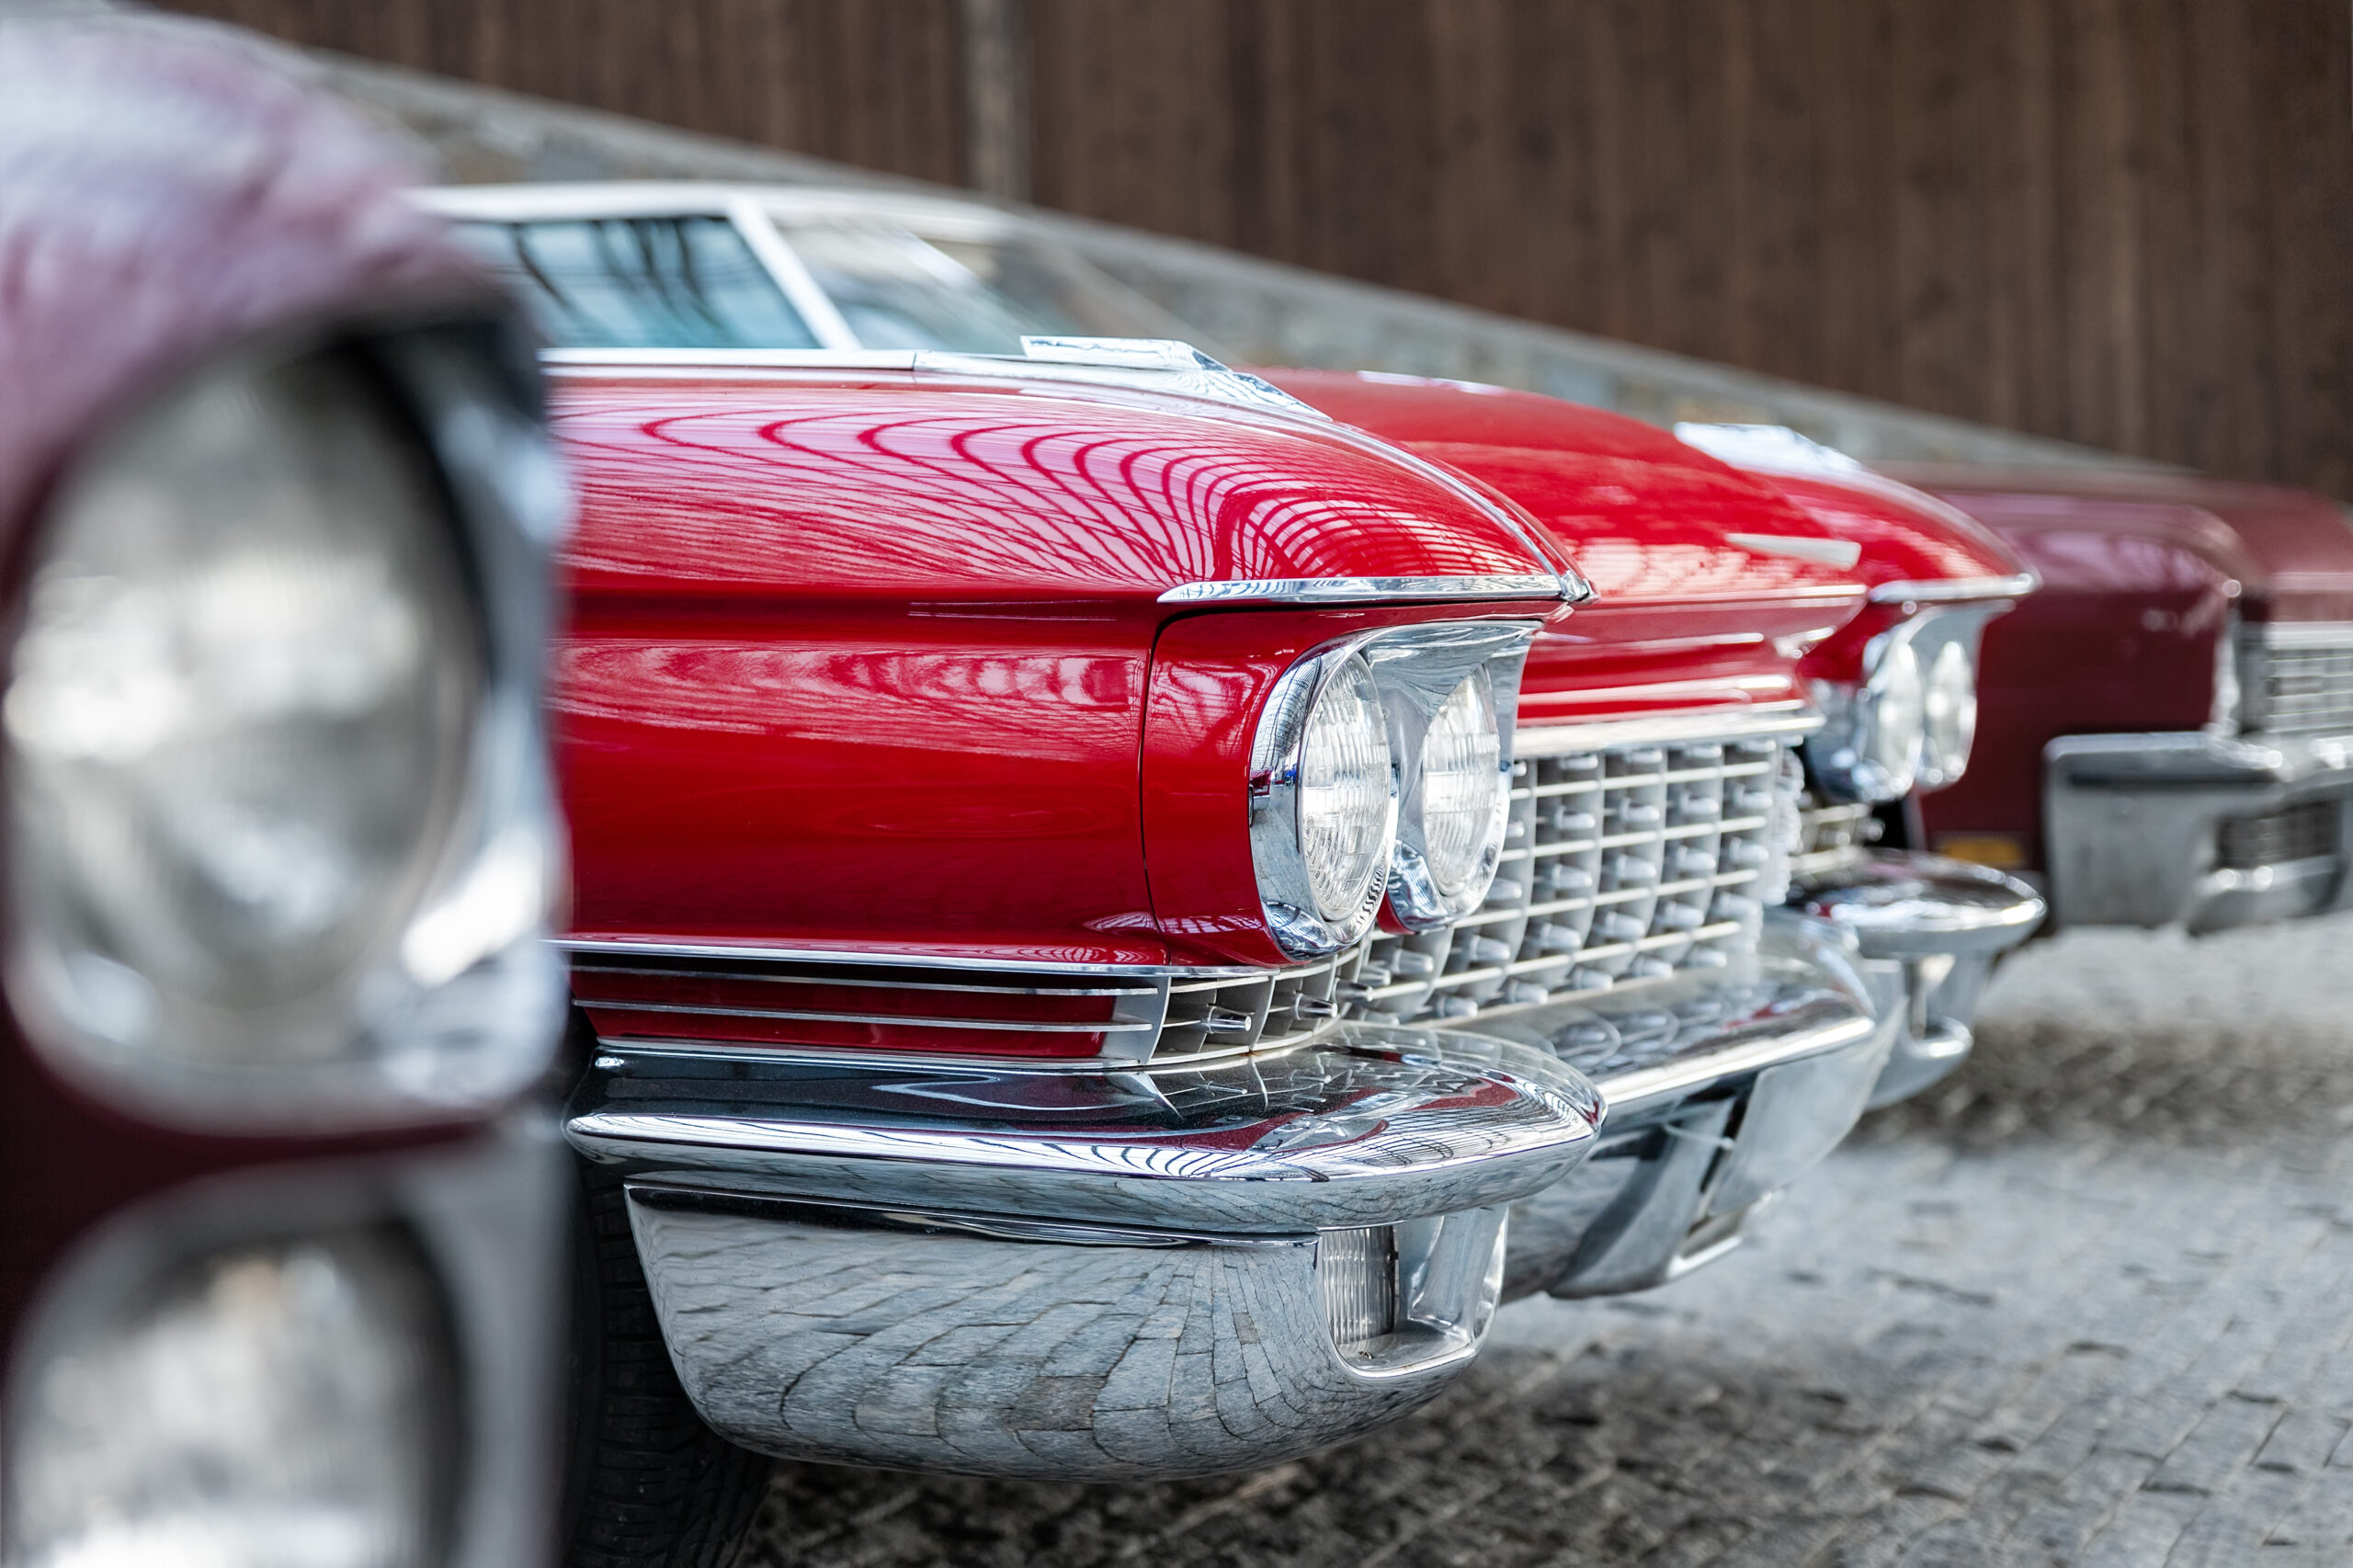 https://jobs-swf.de/wp-content/uploads/2023/06/many-classic-red-vintage-old-american-cars-parked-2022-09-27-01-00-30-utc-scaled.jpg